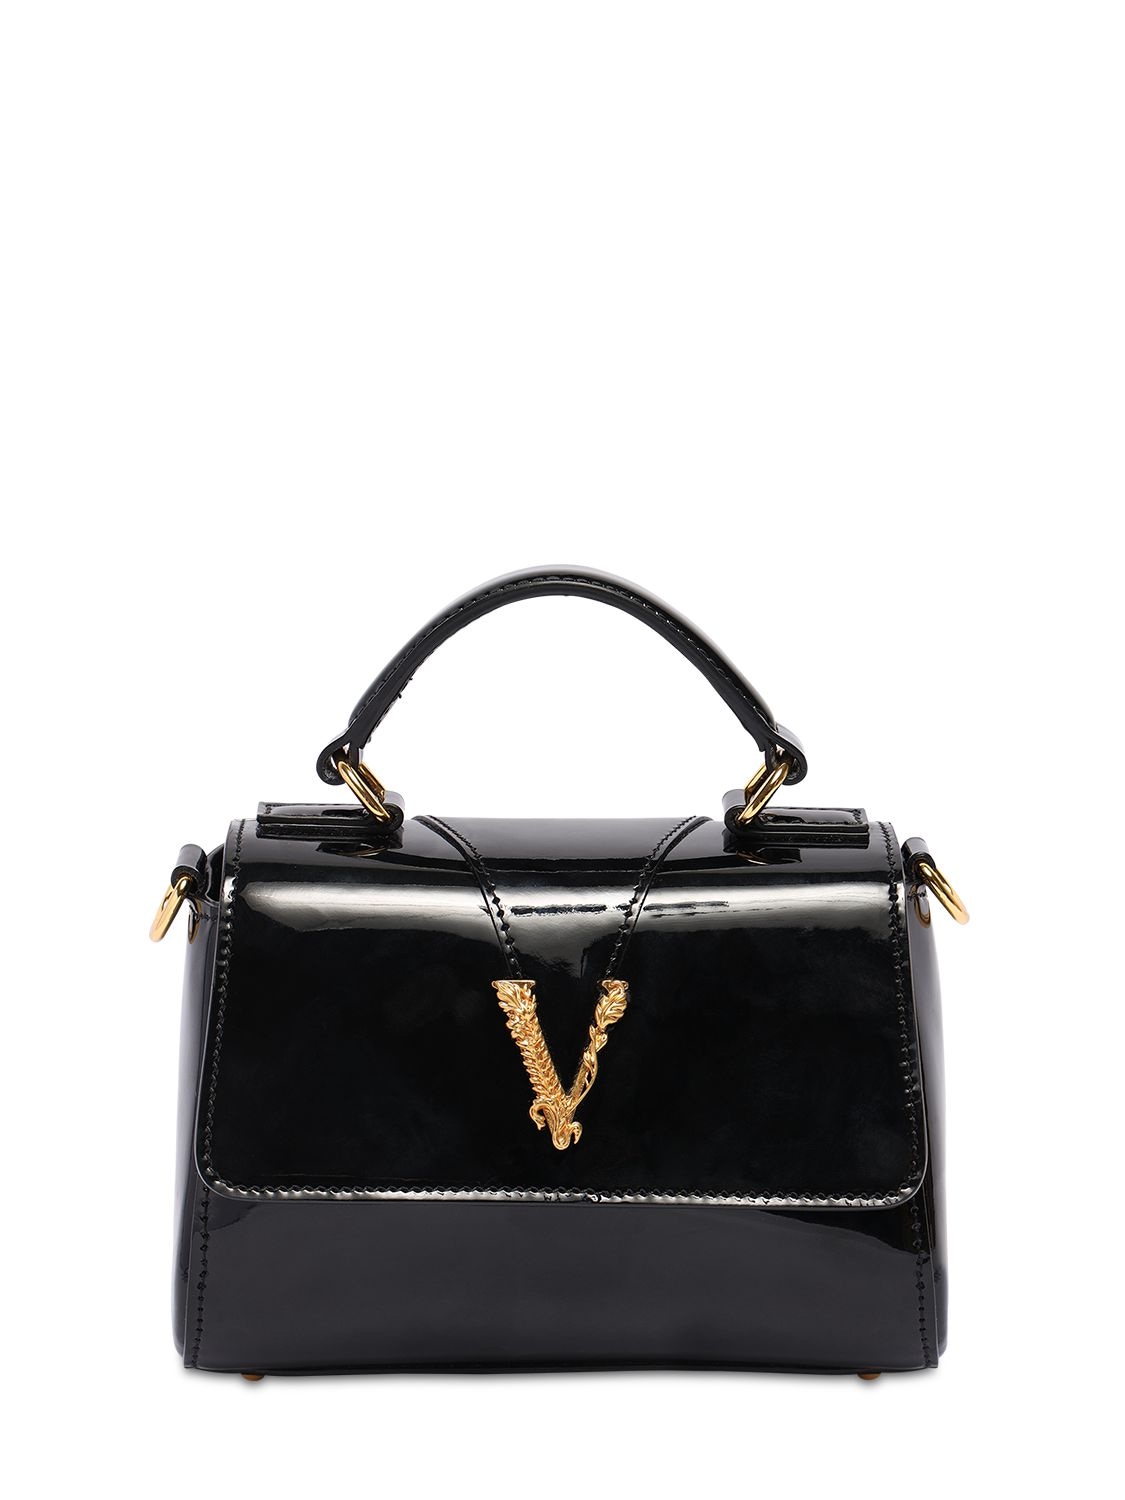 Versace Kids' Patent Leather Bag In Black